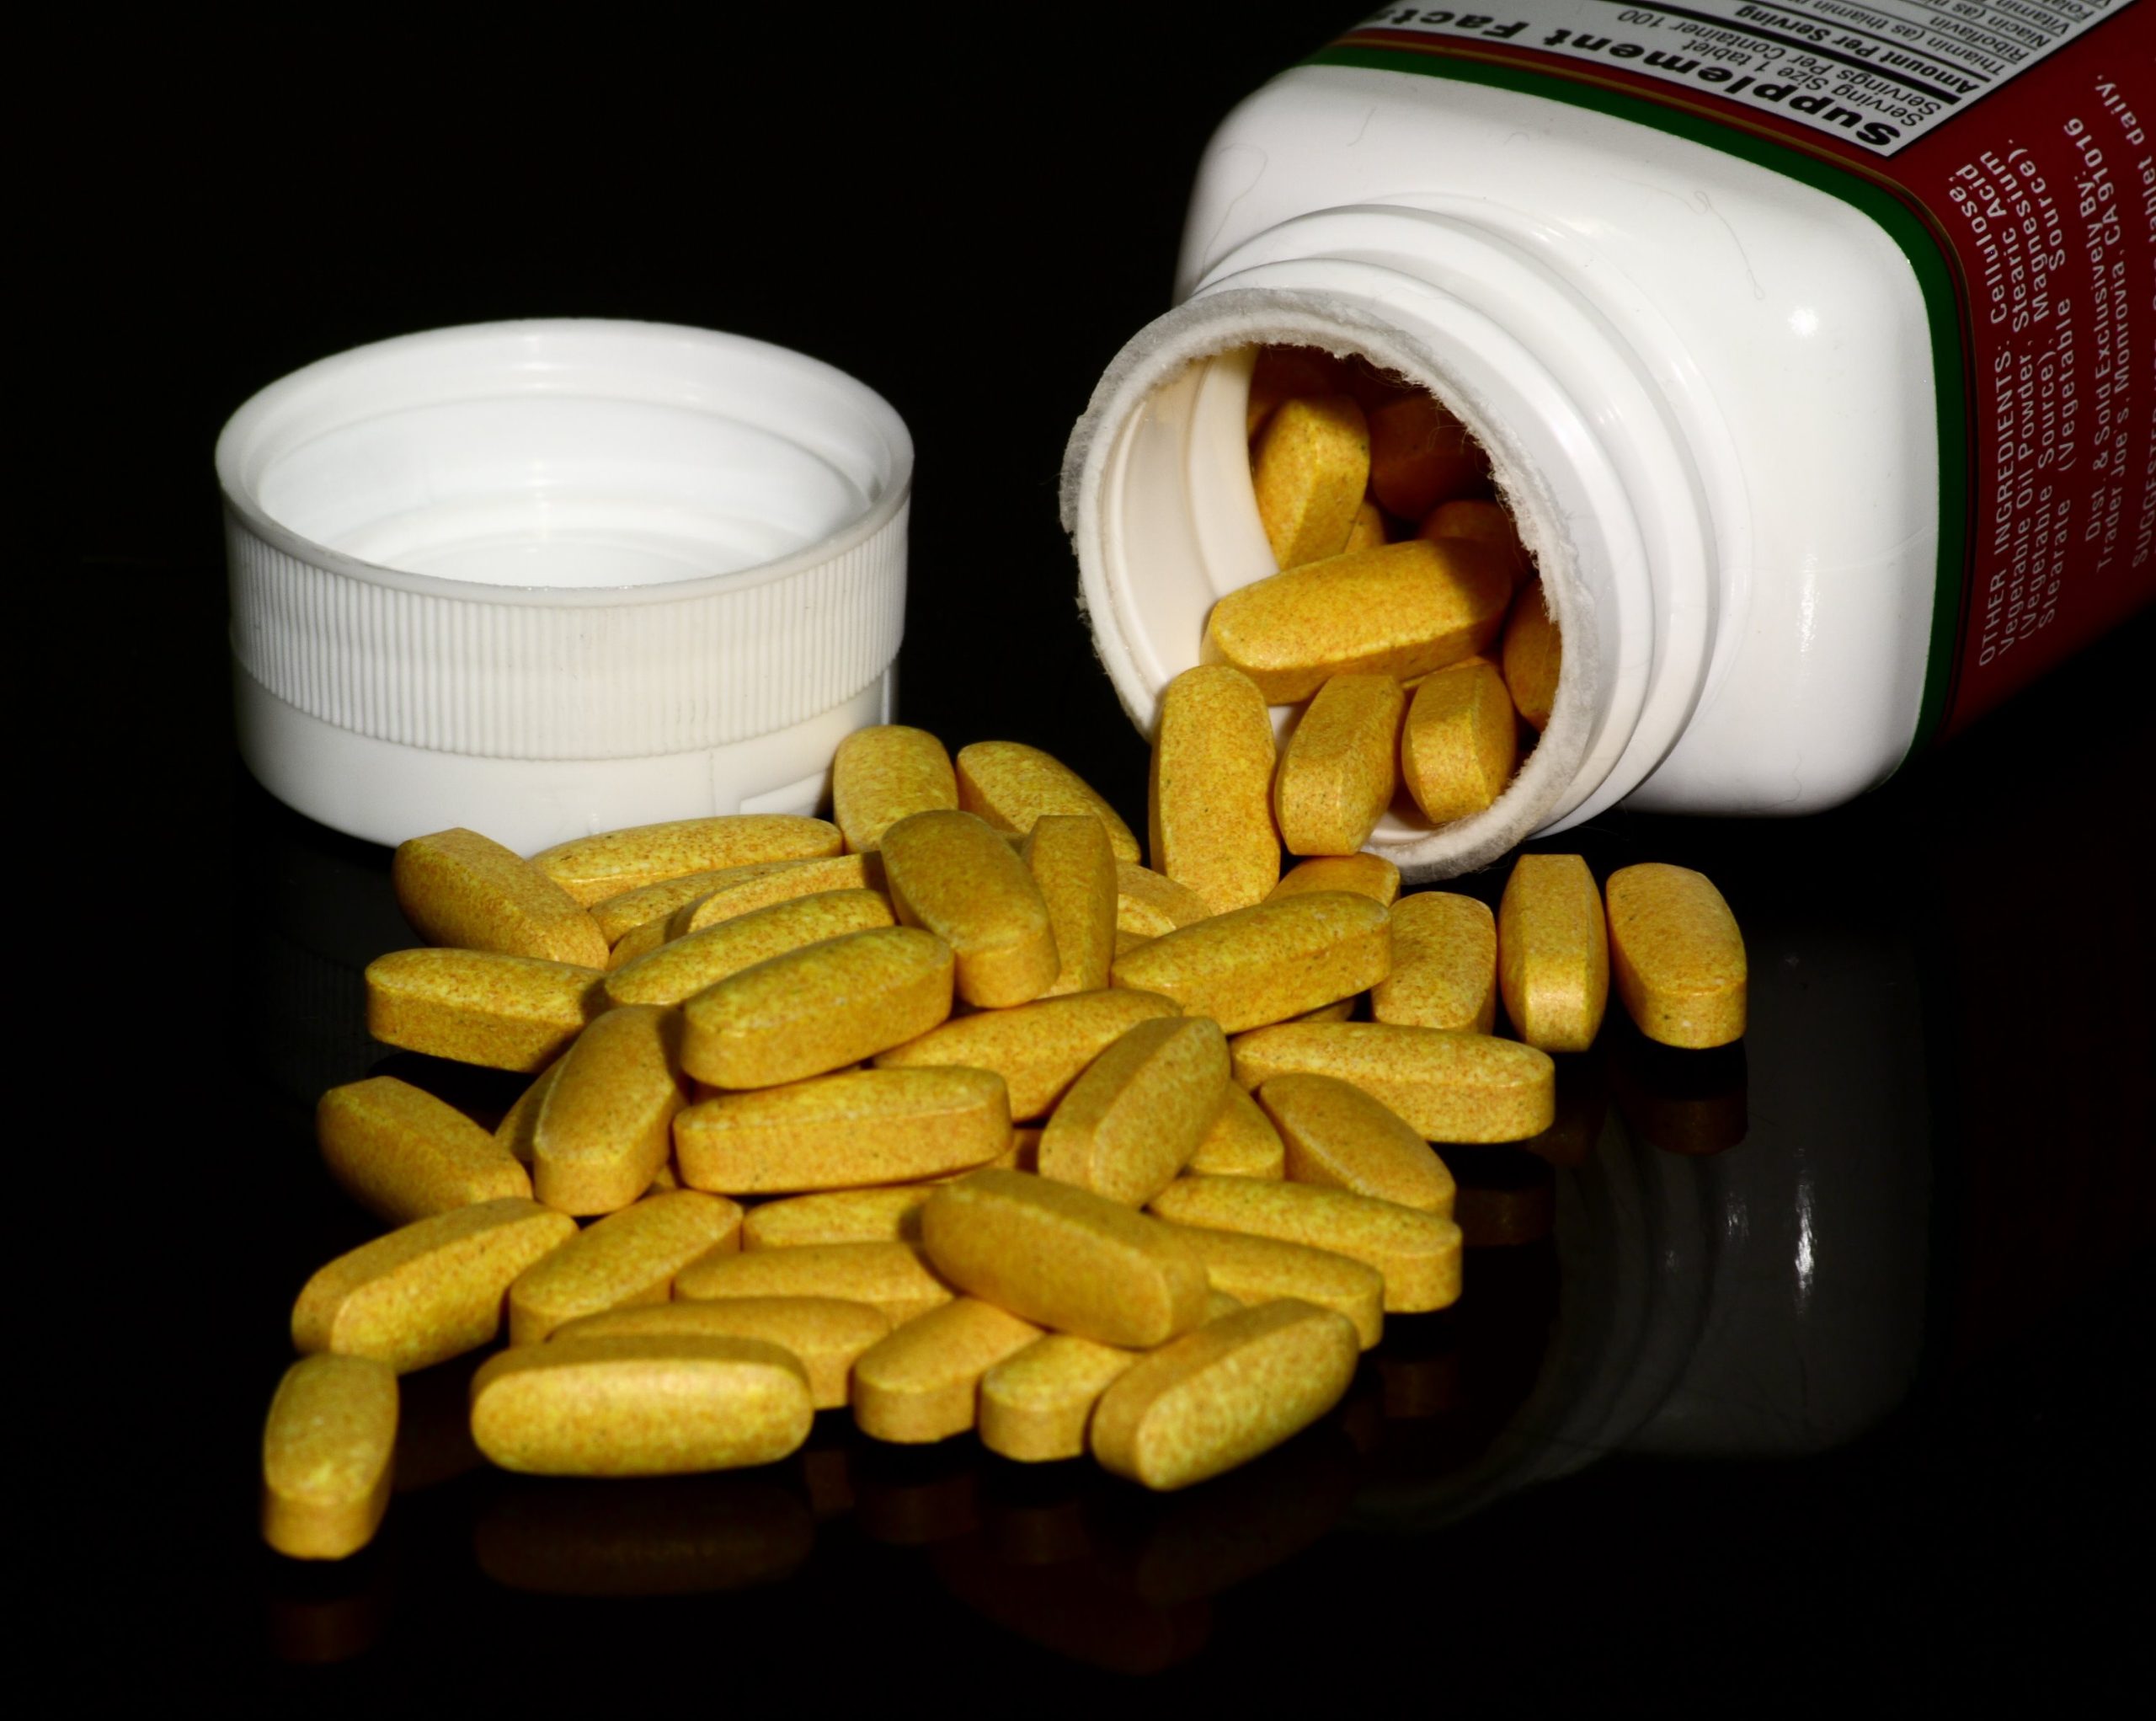 Legal Steroids The Safer Alternative for Building Muscle and Enhancing Performance